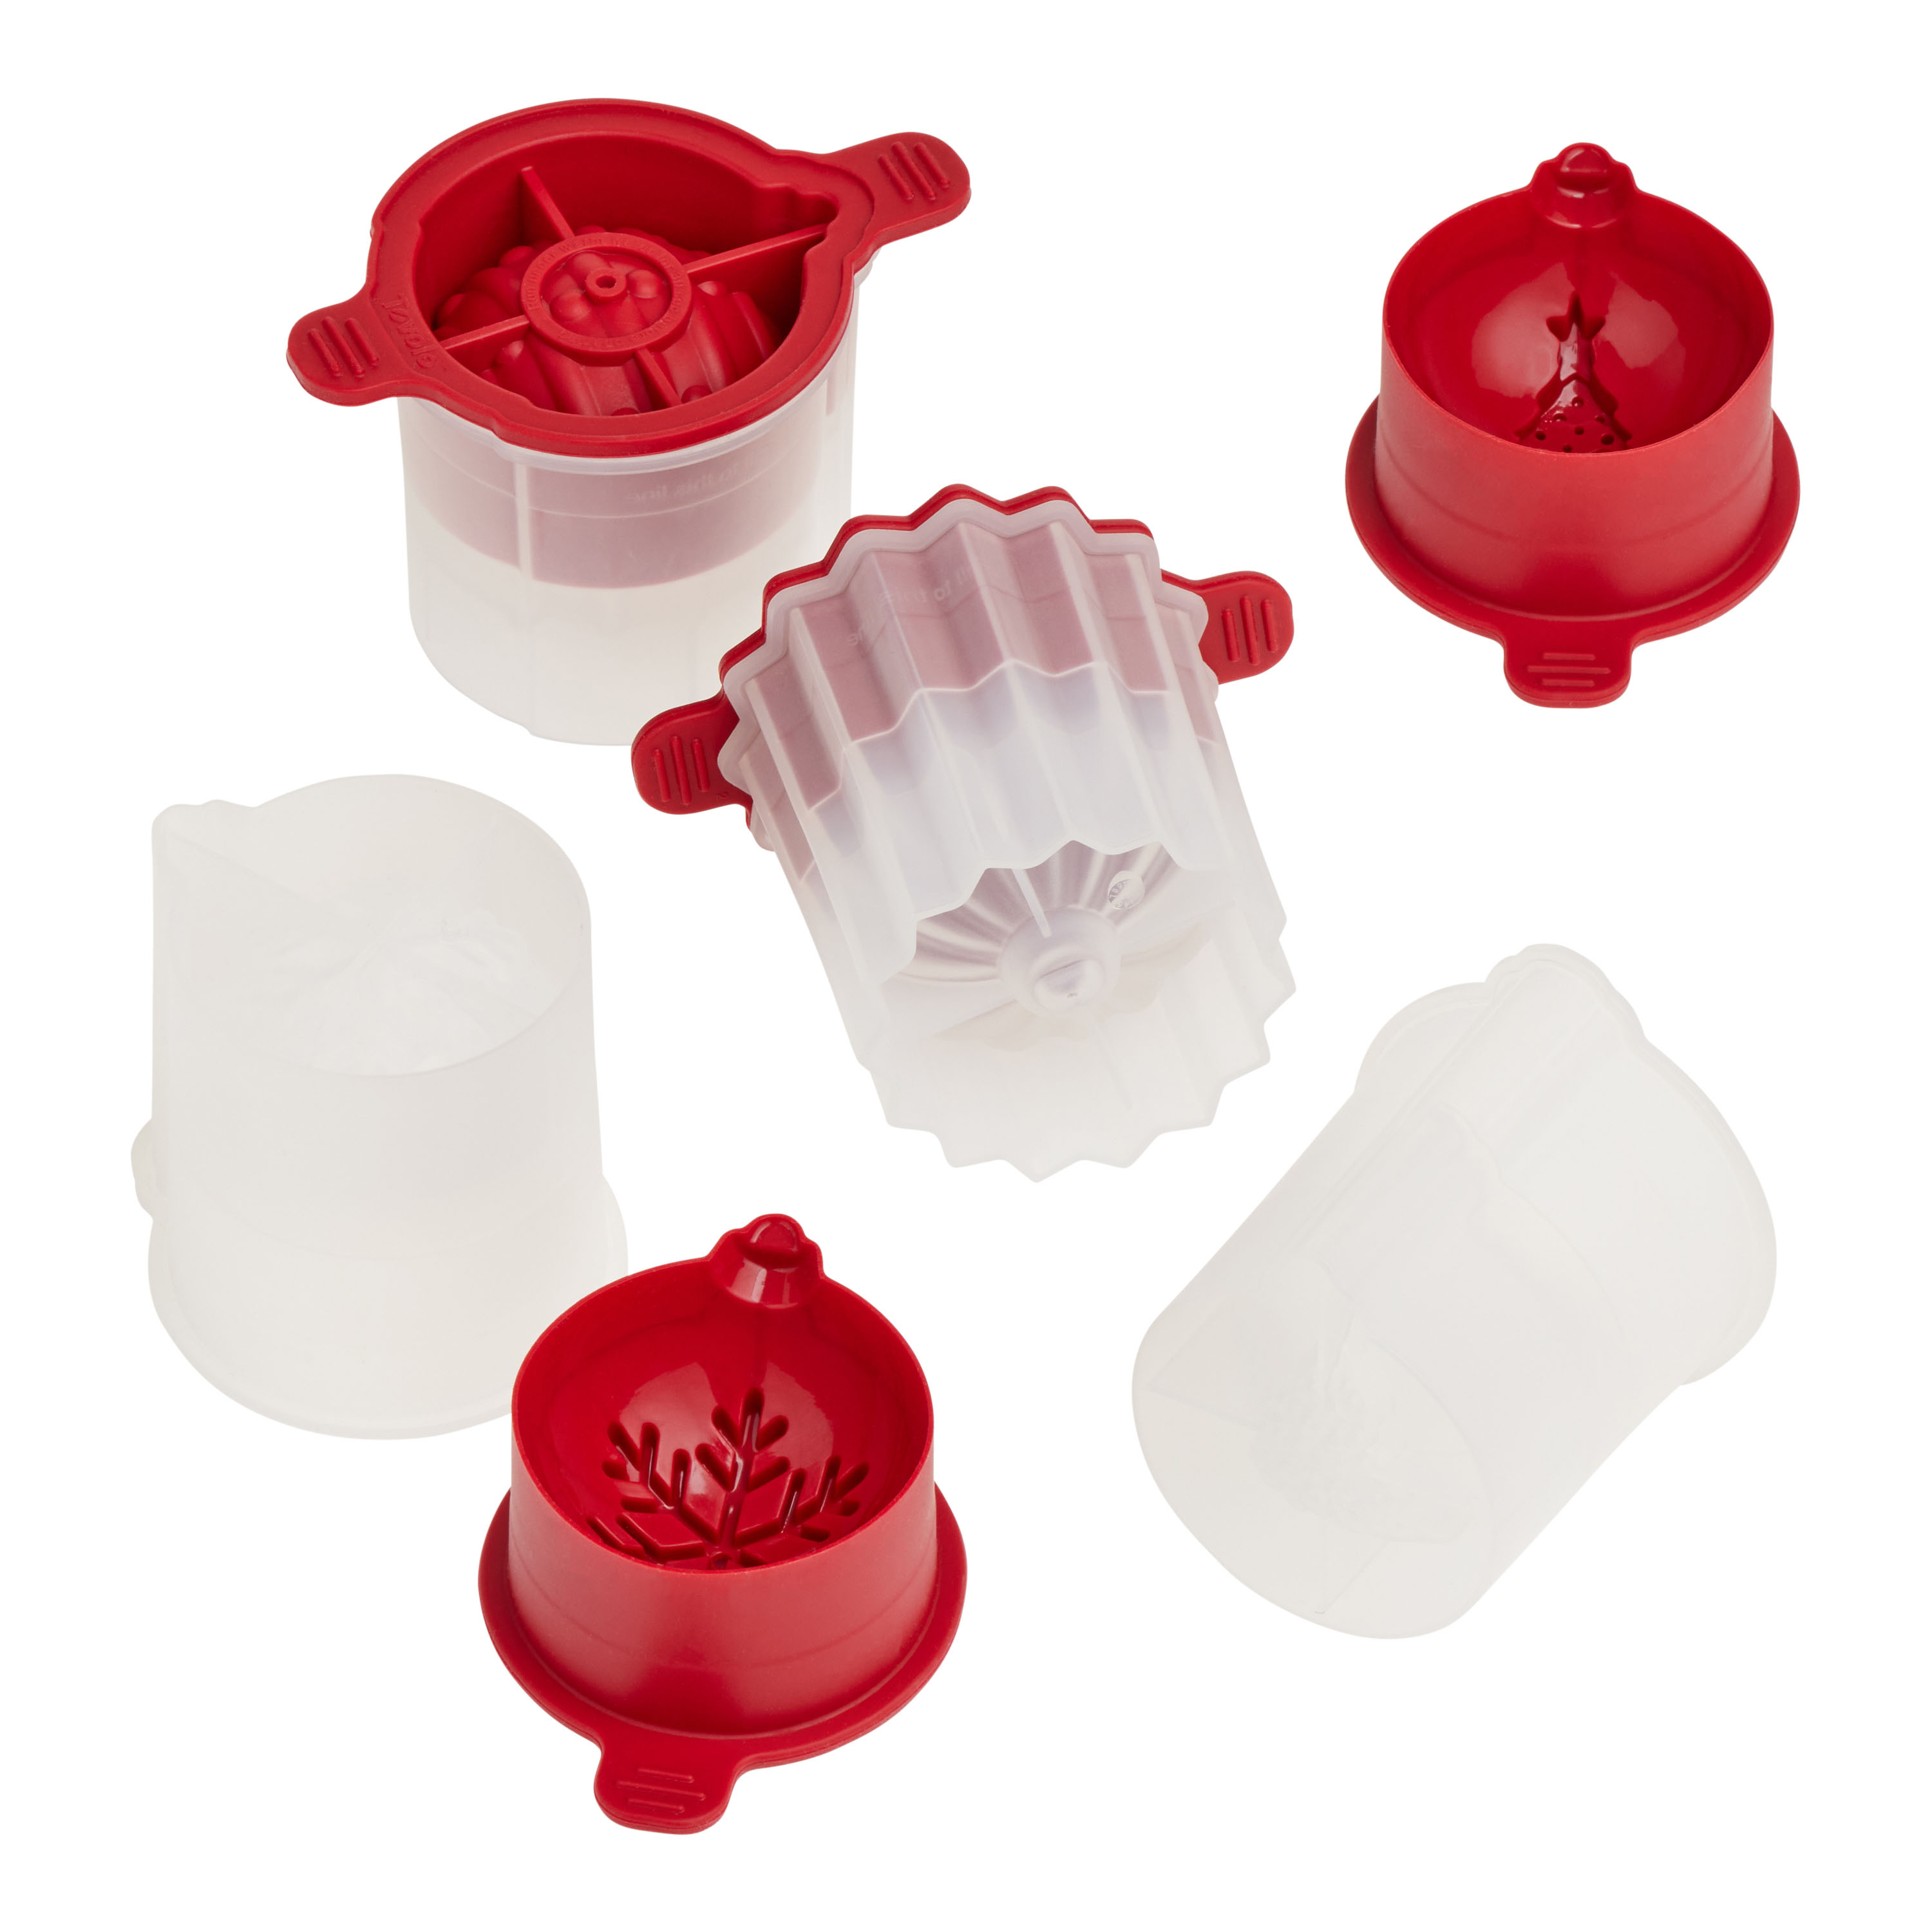 Christmas Ornament Ice Molds, Set of 2, for Making Leak-free, Slow